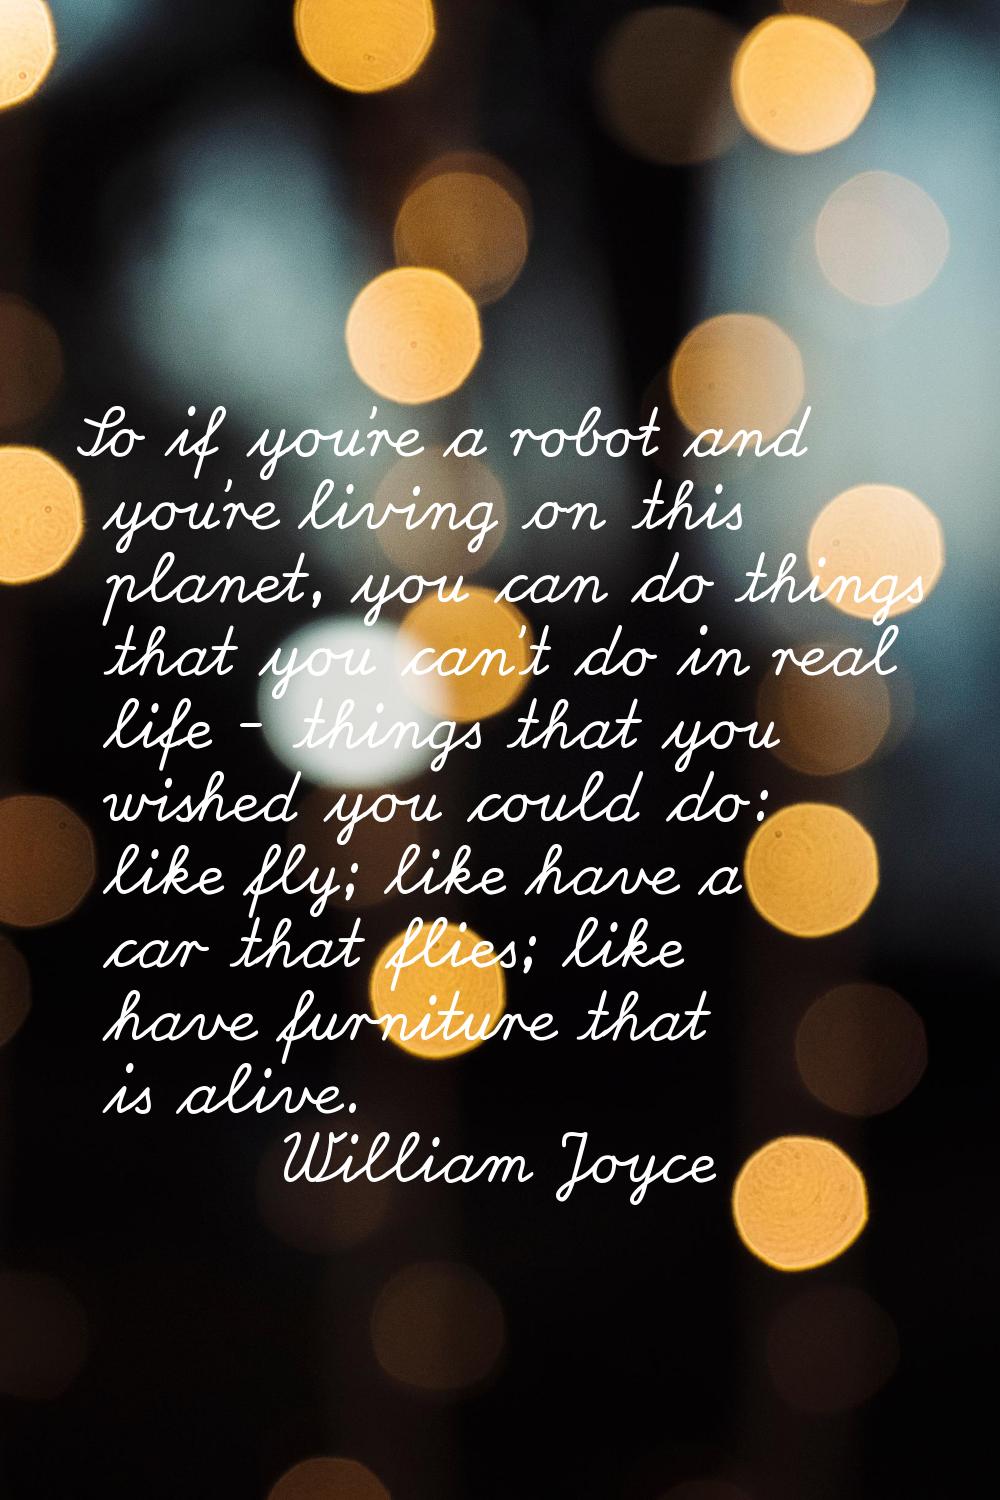 So if you're a robot and you're living on this planet, you can do things that you can't do in real 